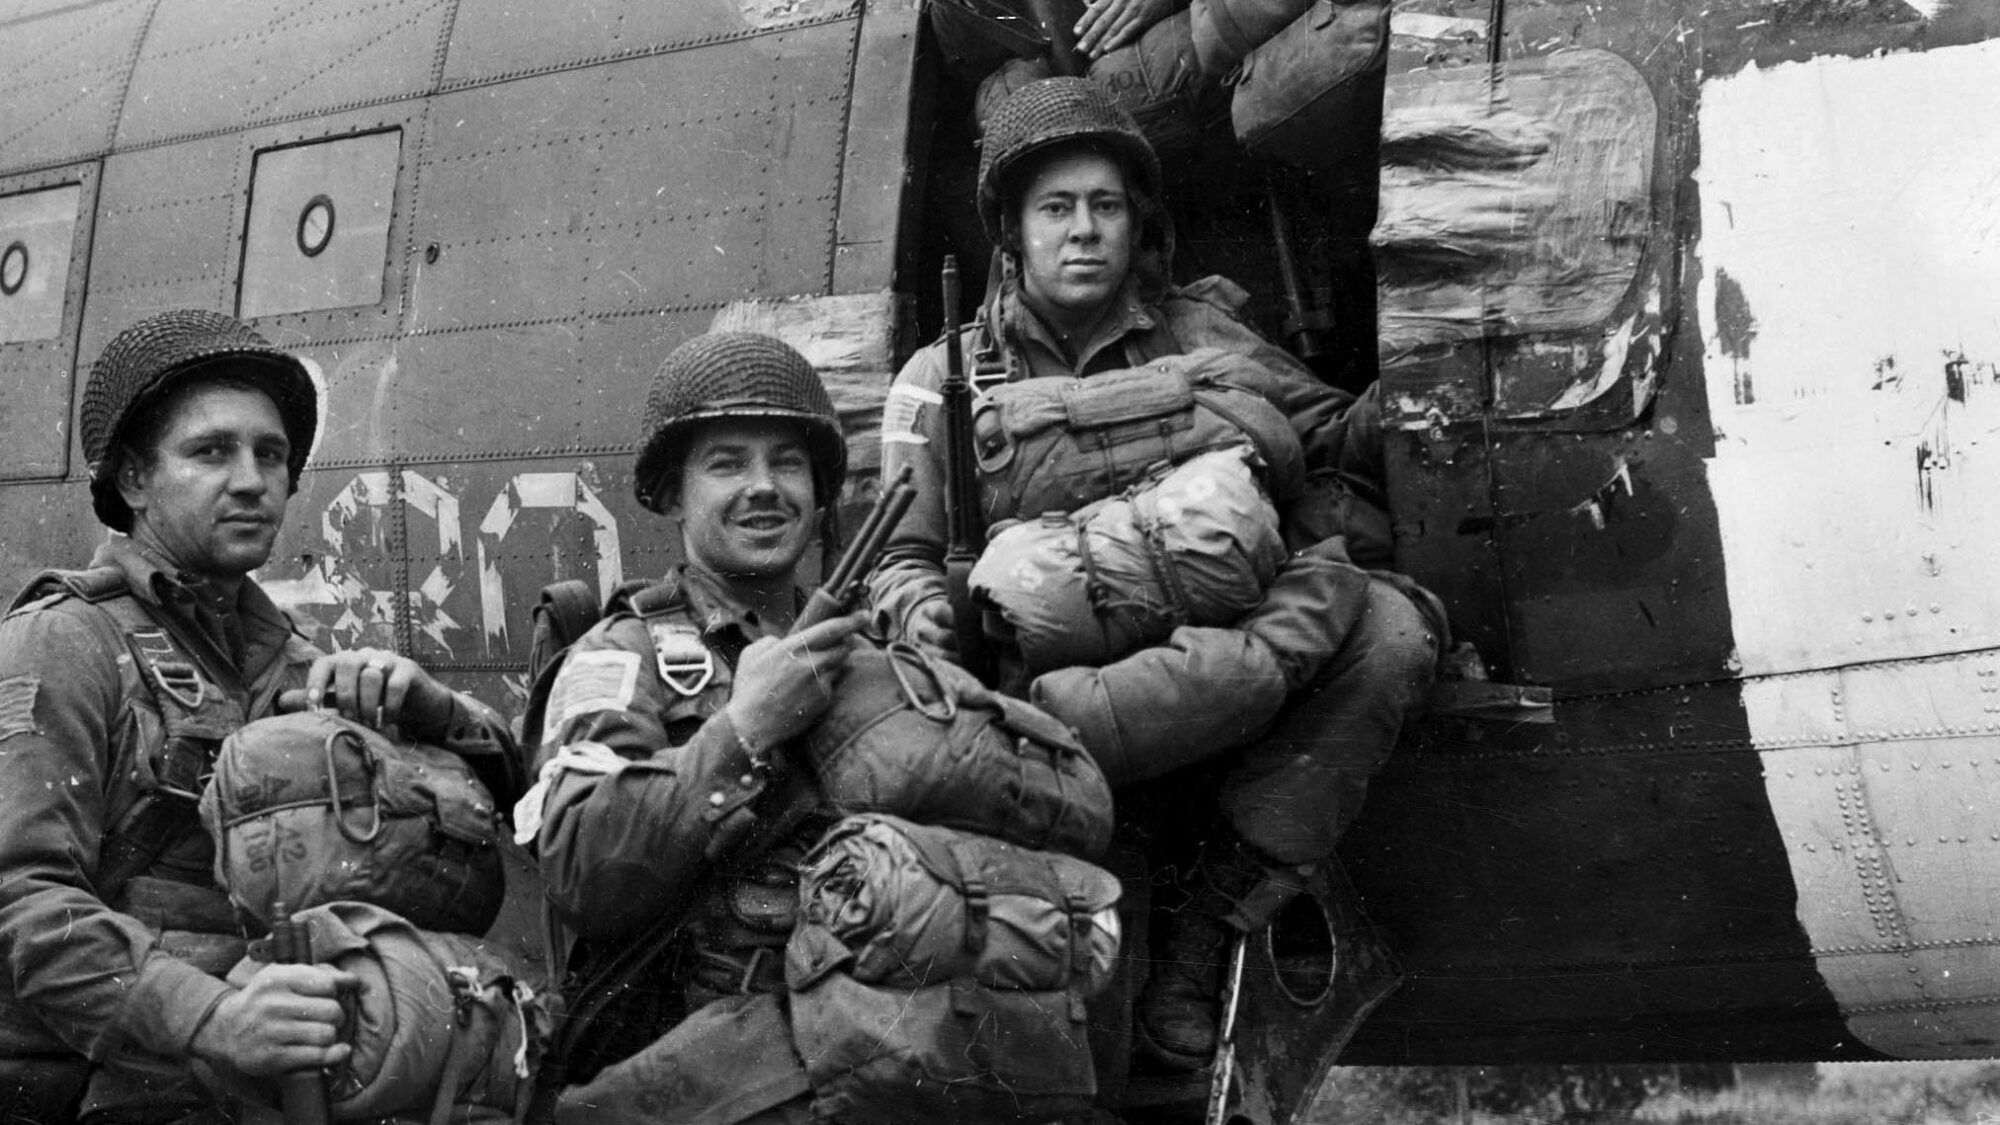 How effective were American Paratroopers in Normandy?